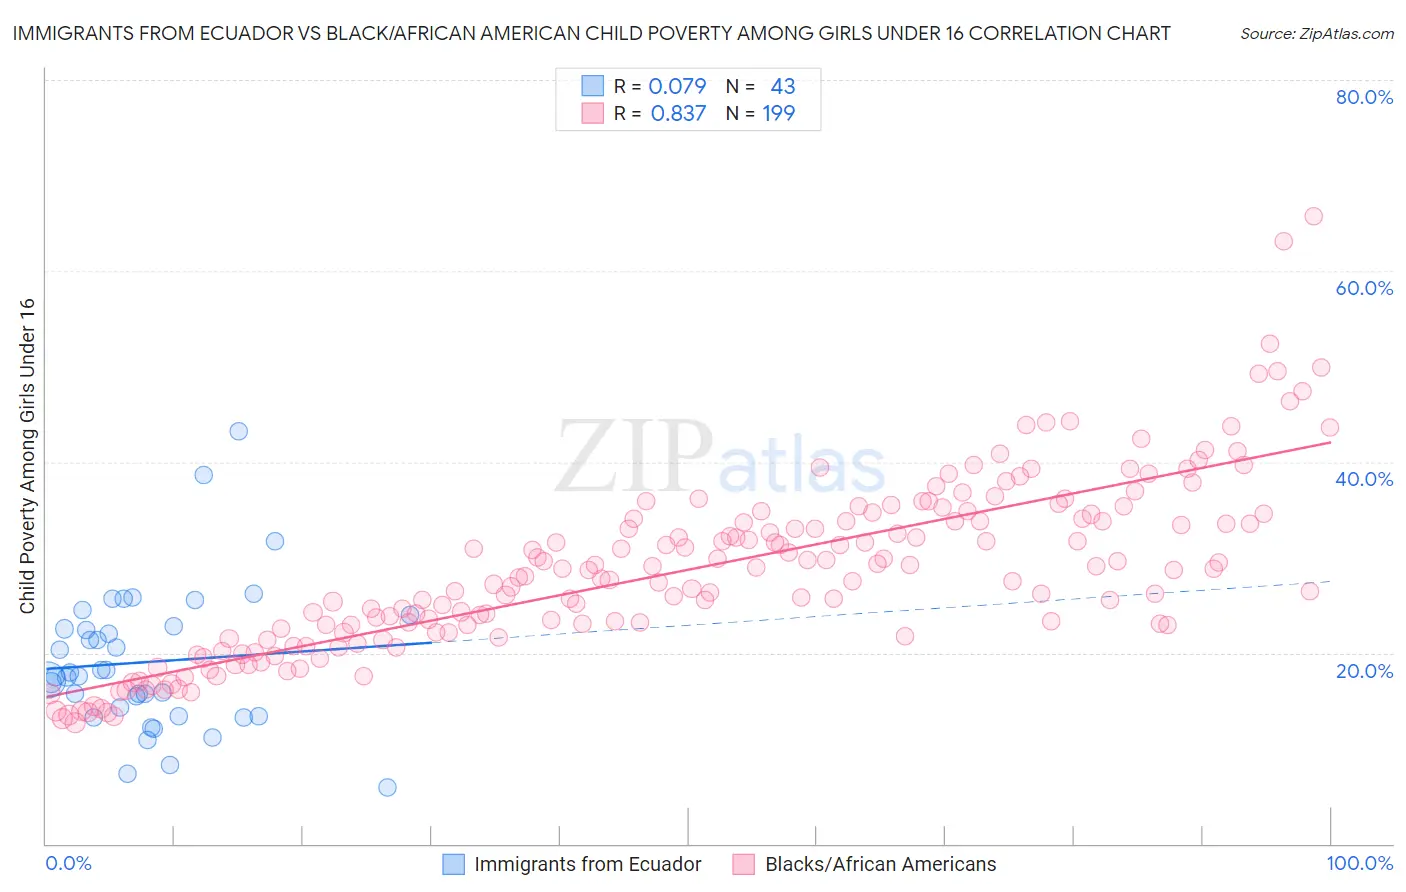 Immigrants from Ecuador vs Black/African American Child Poverty Among Girls Under 16